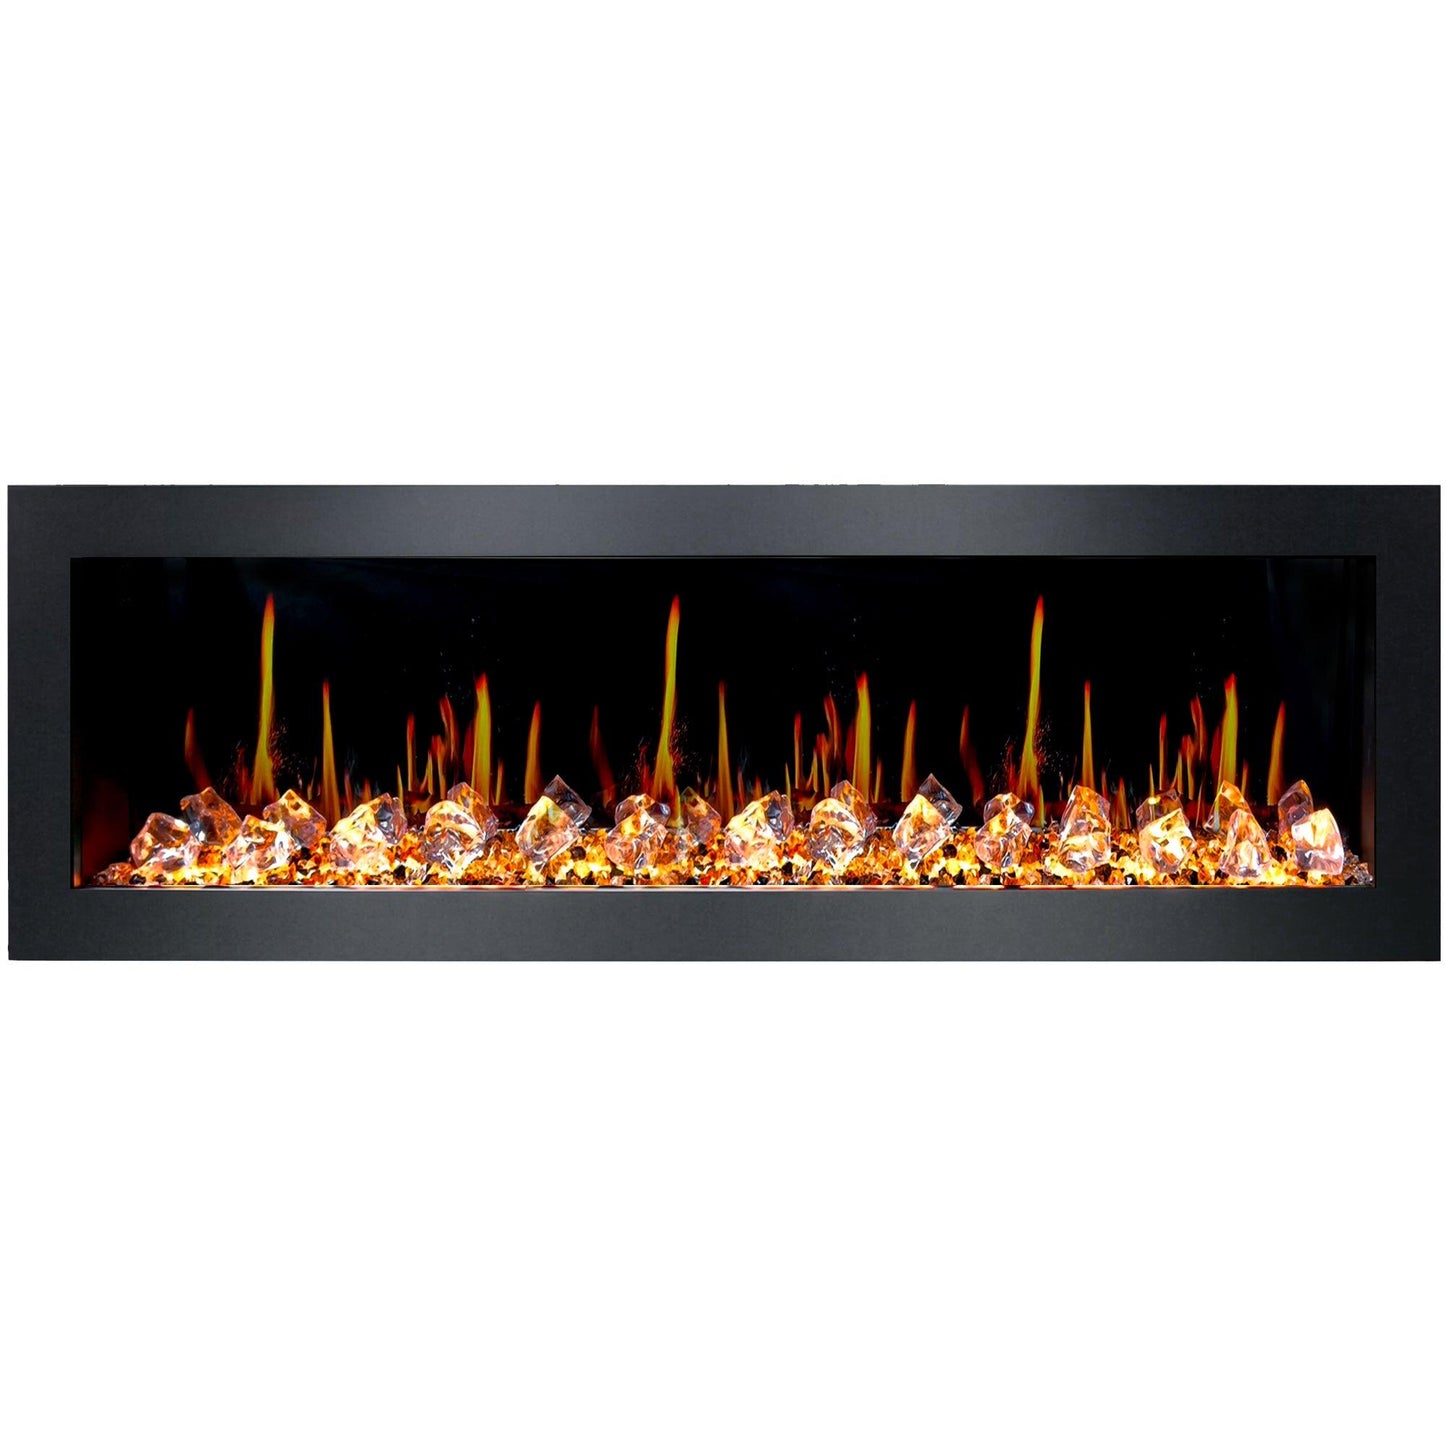 ZopaFlame™ 68" Linear Wall-mount Electric Fireplace - BC19688V - ZopaFlame Fireplaces